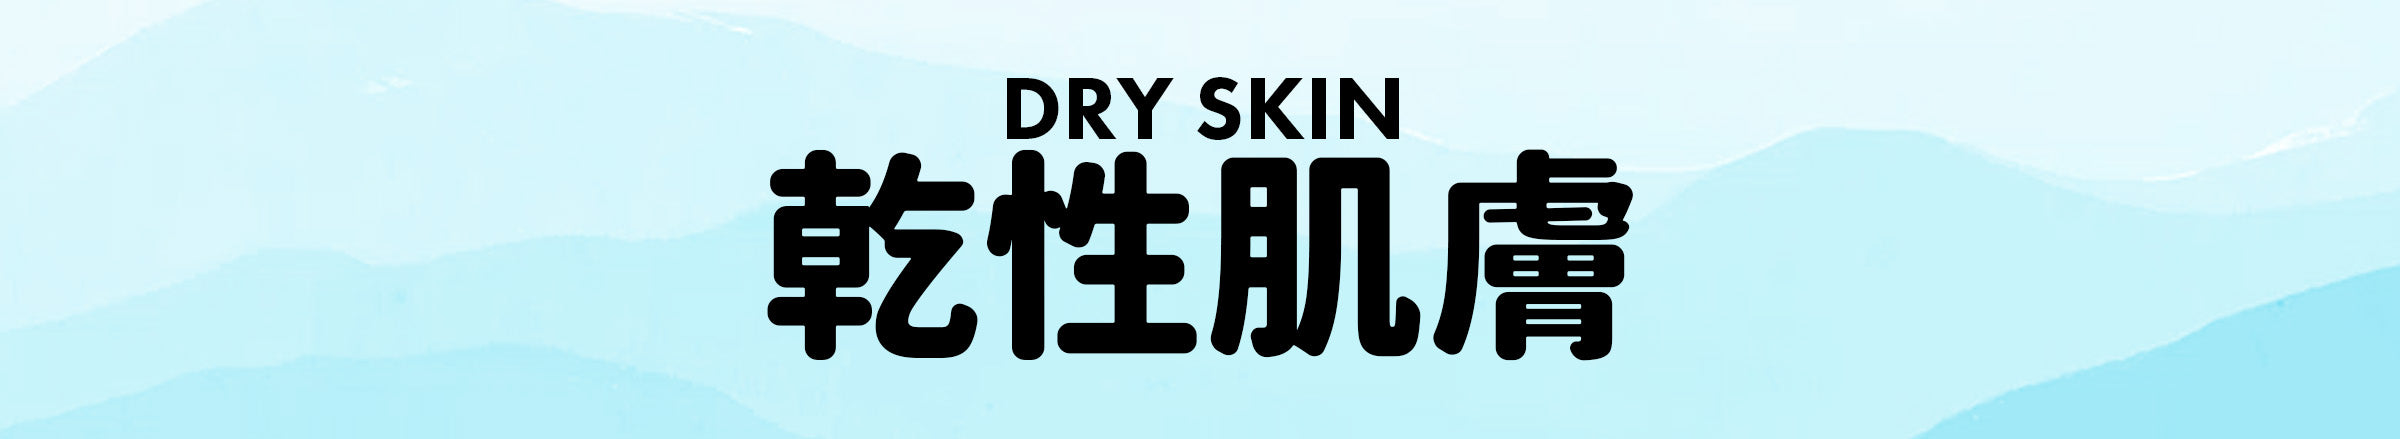 Dry Skin Type Products